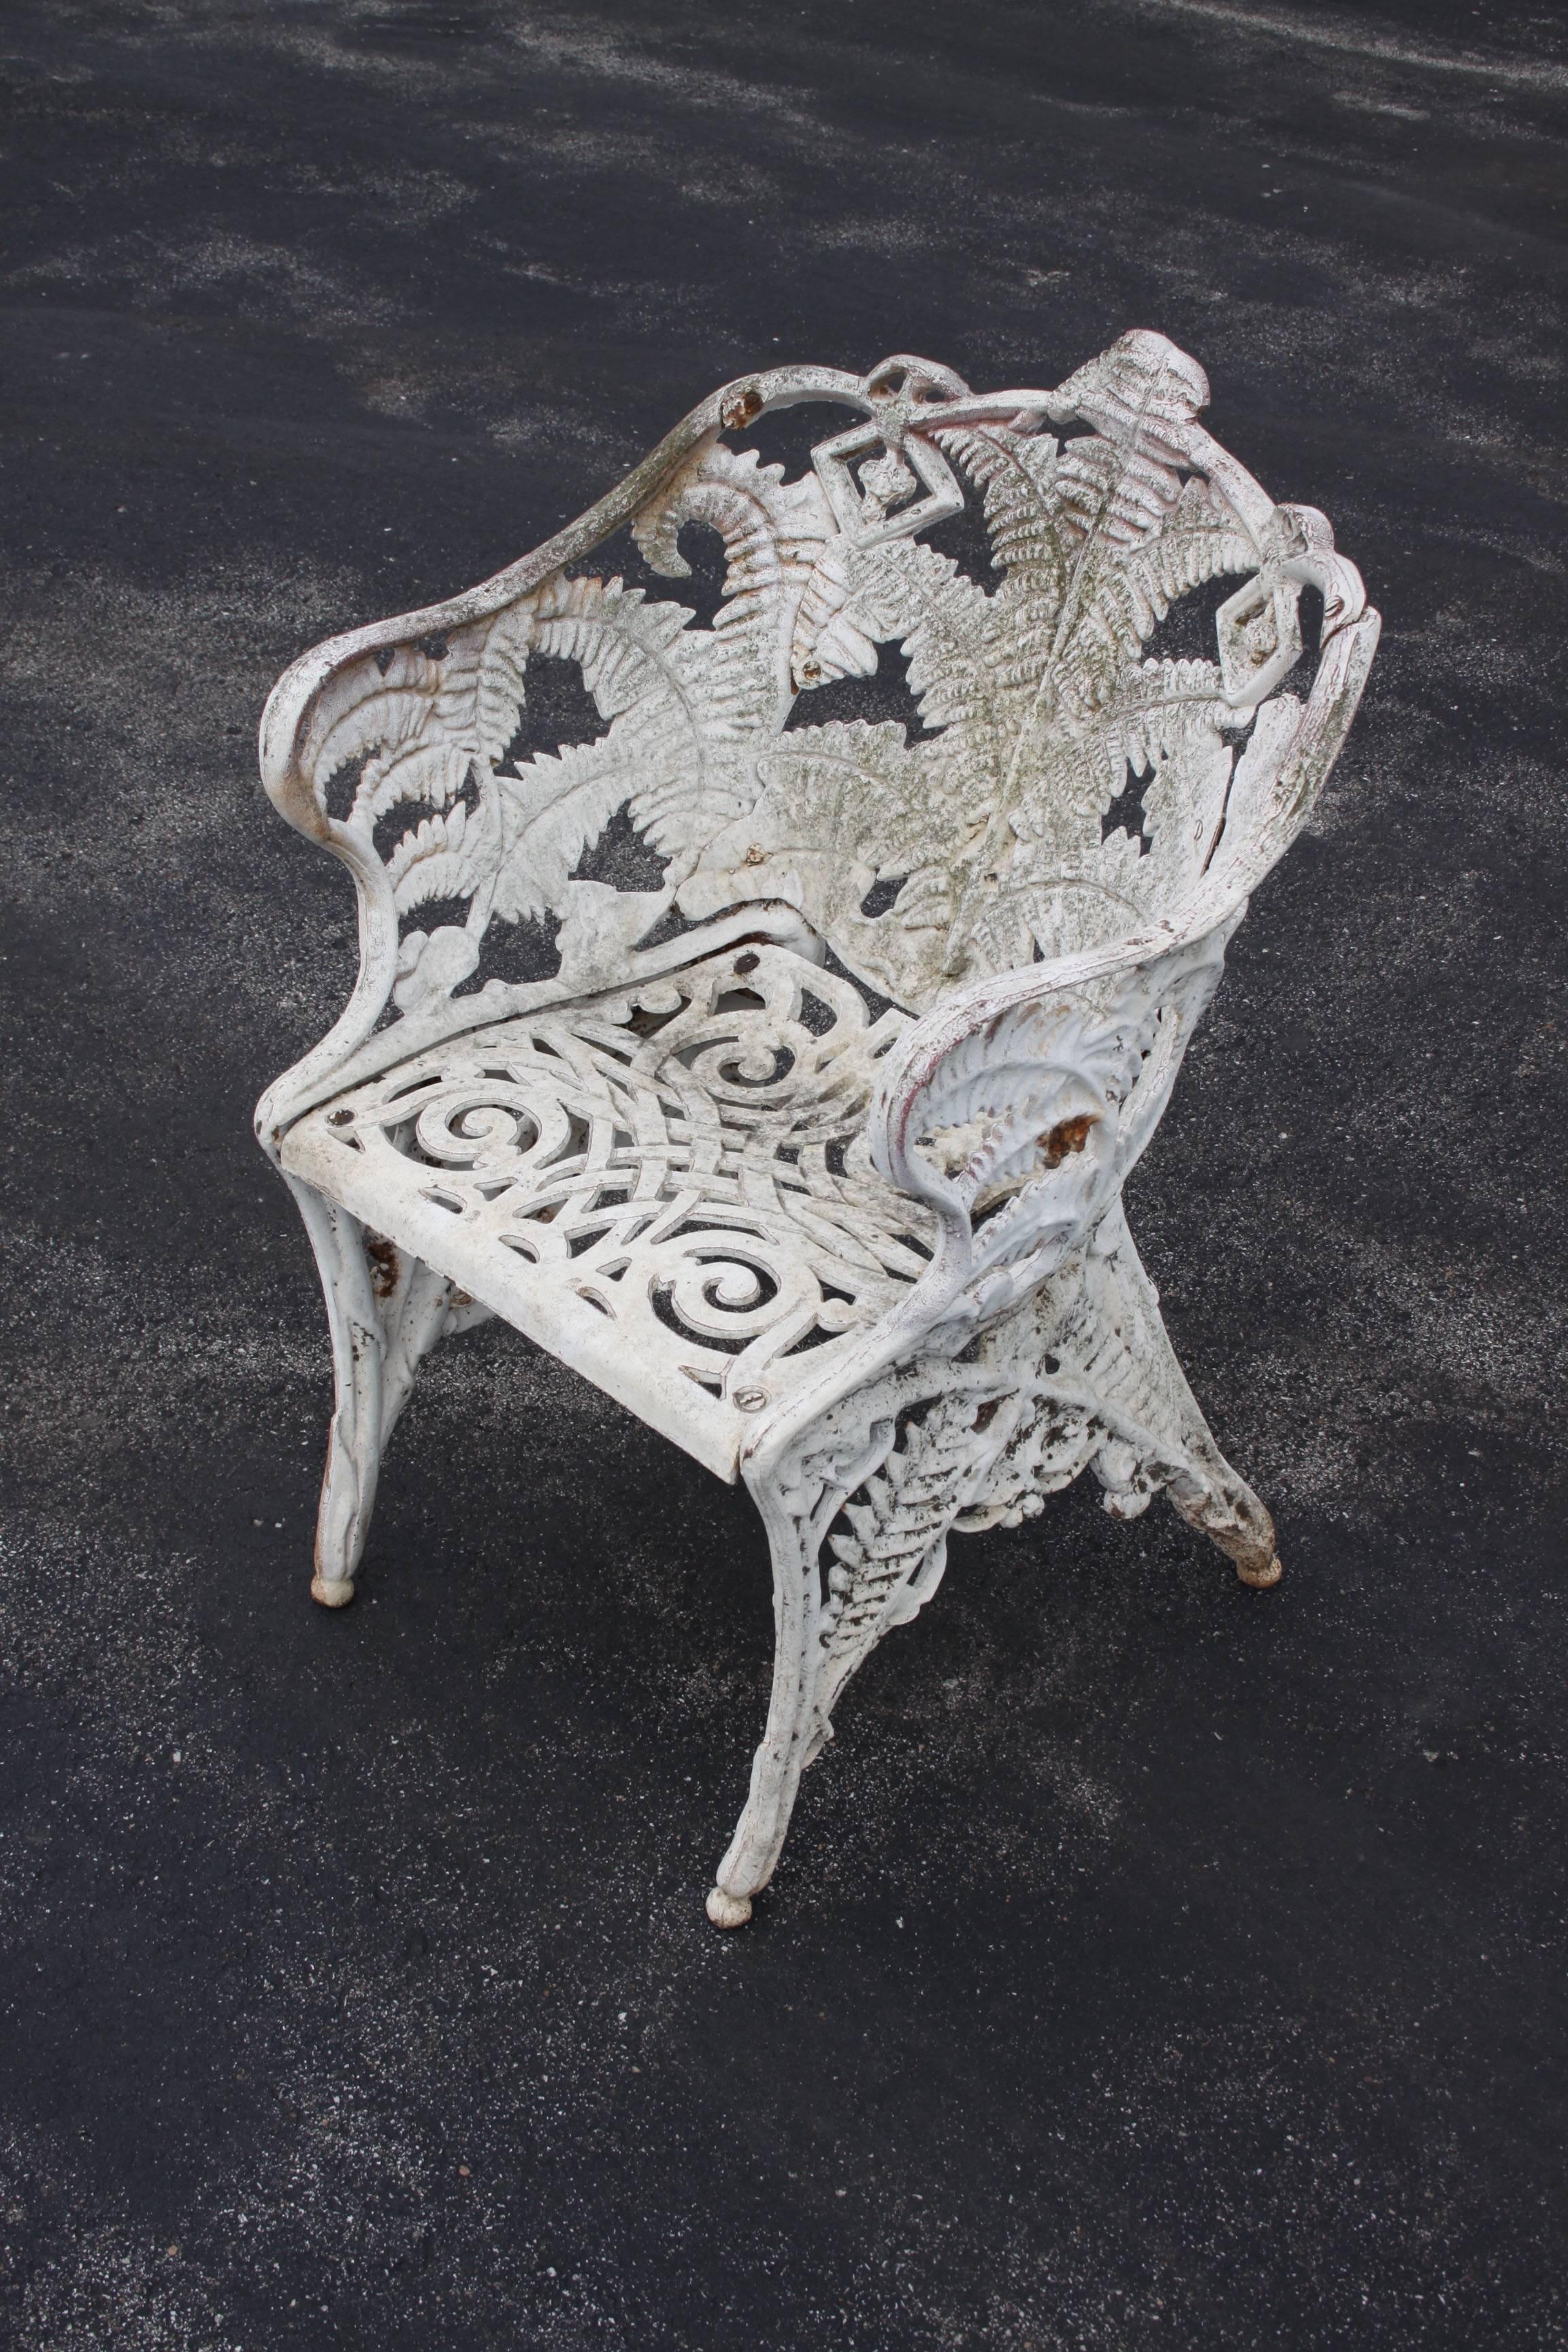 Pair of early 20th century cast iron fern pattern garden chairs from an 144 year old Historic St. Louis home. Paint shows signs of age, wear and rust. Can be blasted, dipped and repainted for $125 per chair.